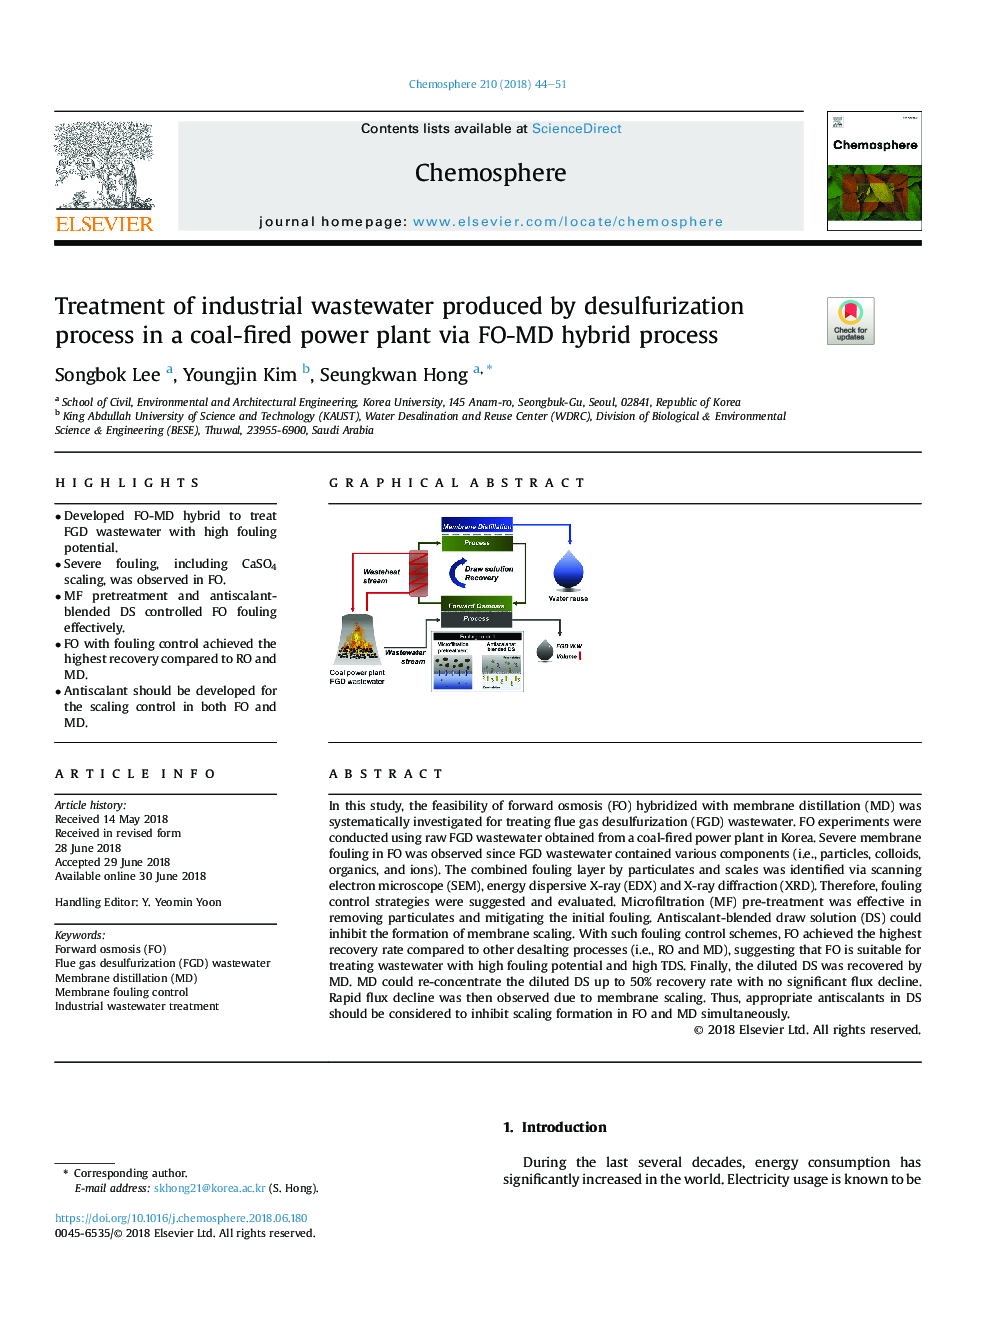 Treatment of industrial wastewater produced by desulfurization process in a coal-fired power plant via FO-MD hybrid process